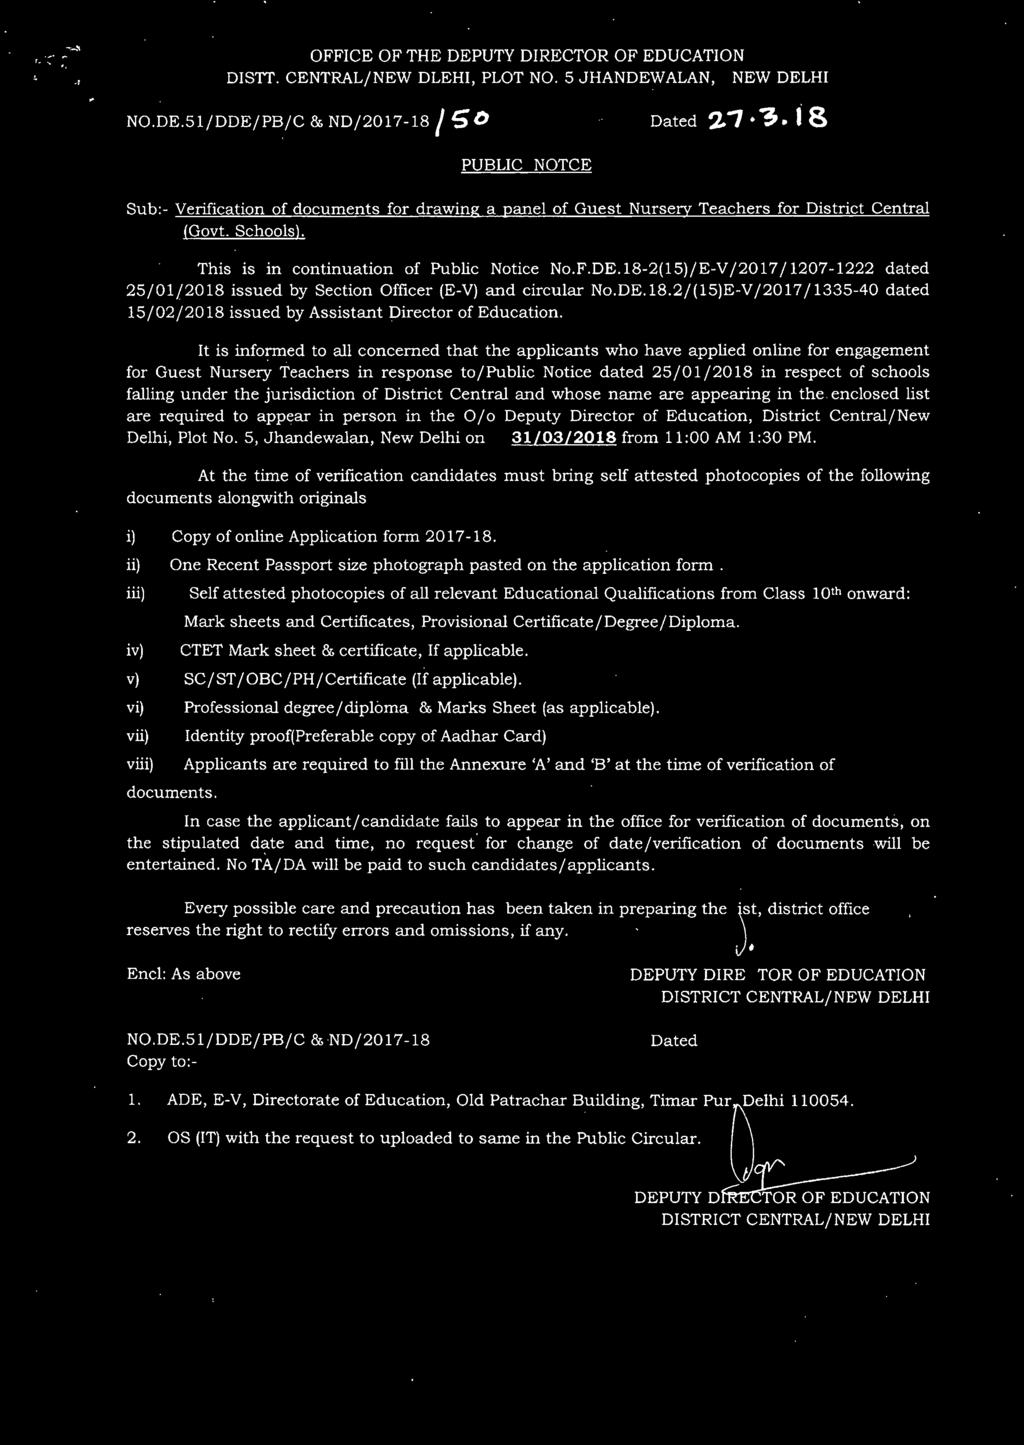 1S-2(15)/E-V /2017/1207-1222 dated 25/01/201S issued by Section Officer (E-V) and circular No.DE.1S.2/(15)E-V/2017/1335-40 dated 15/02/201S issued by Assistant Director of Education.